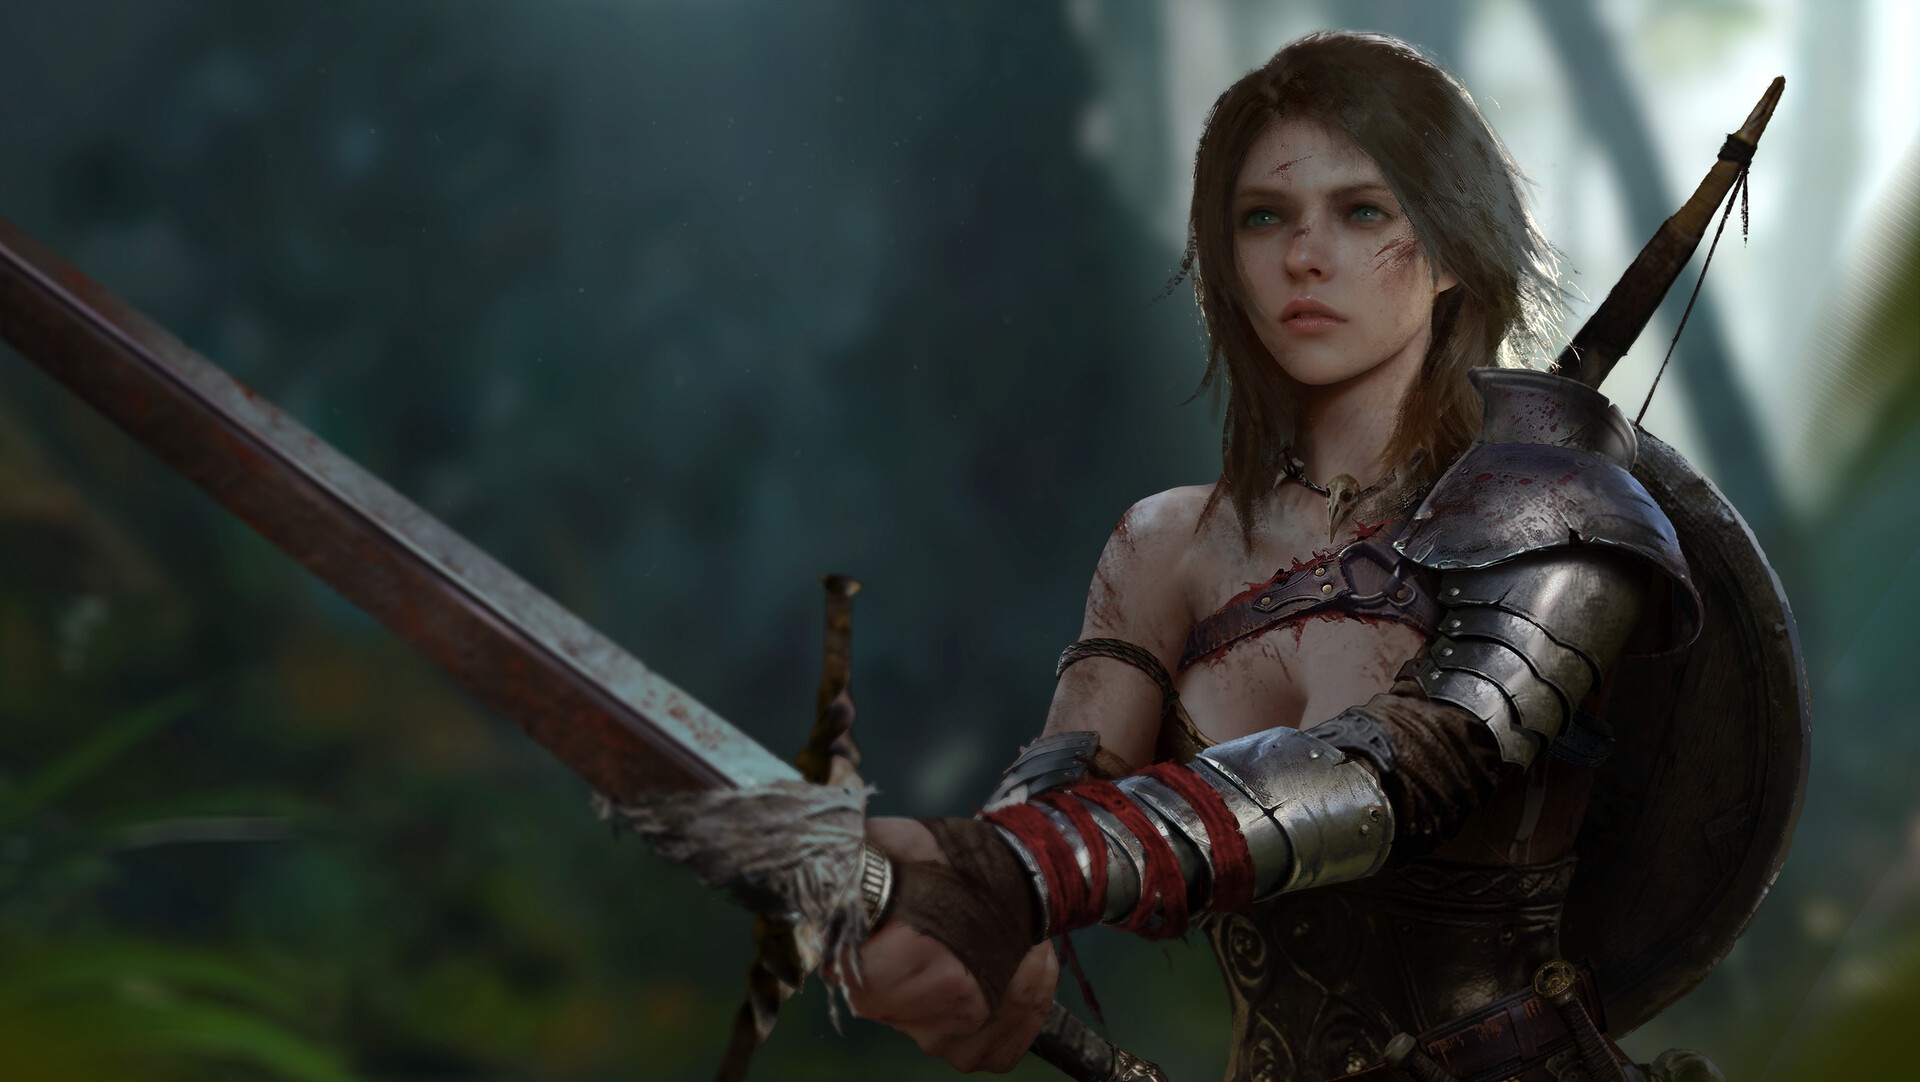  A muscular female warrior with short height and balanced physique, wearing medieval armor and wielding a sword, possibly affiliated with the Order of Calatrava.